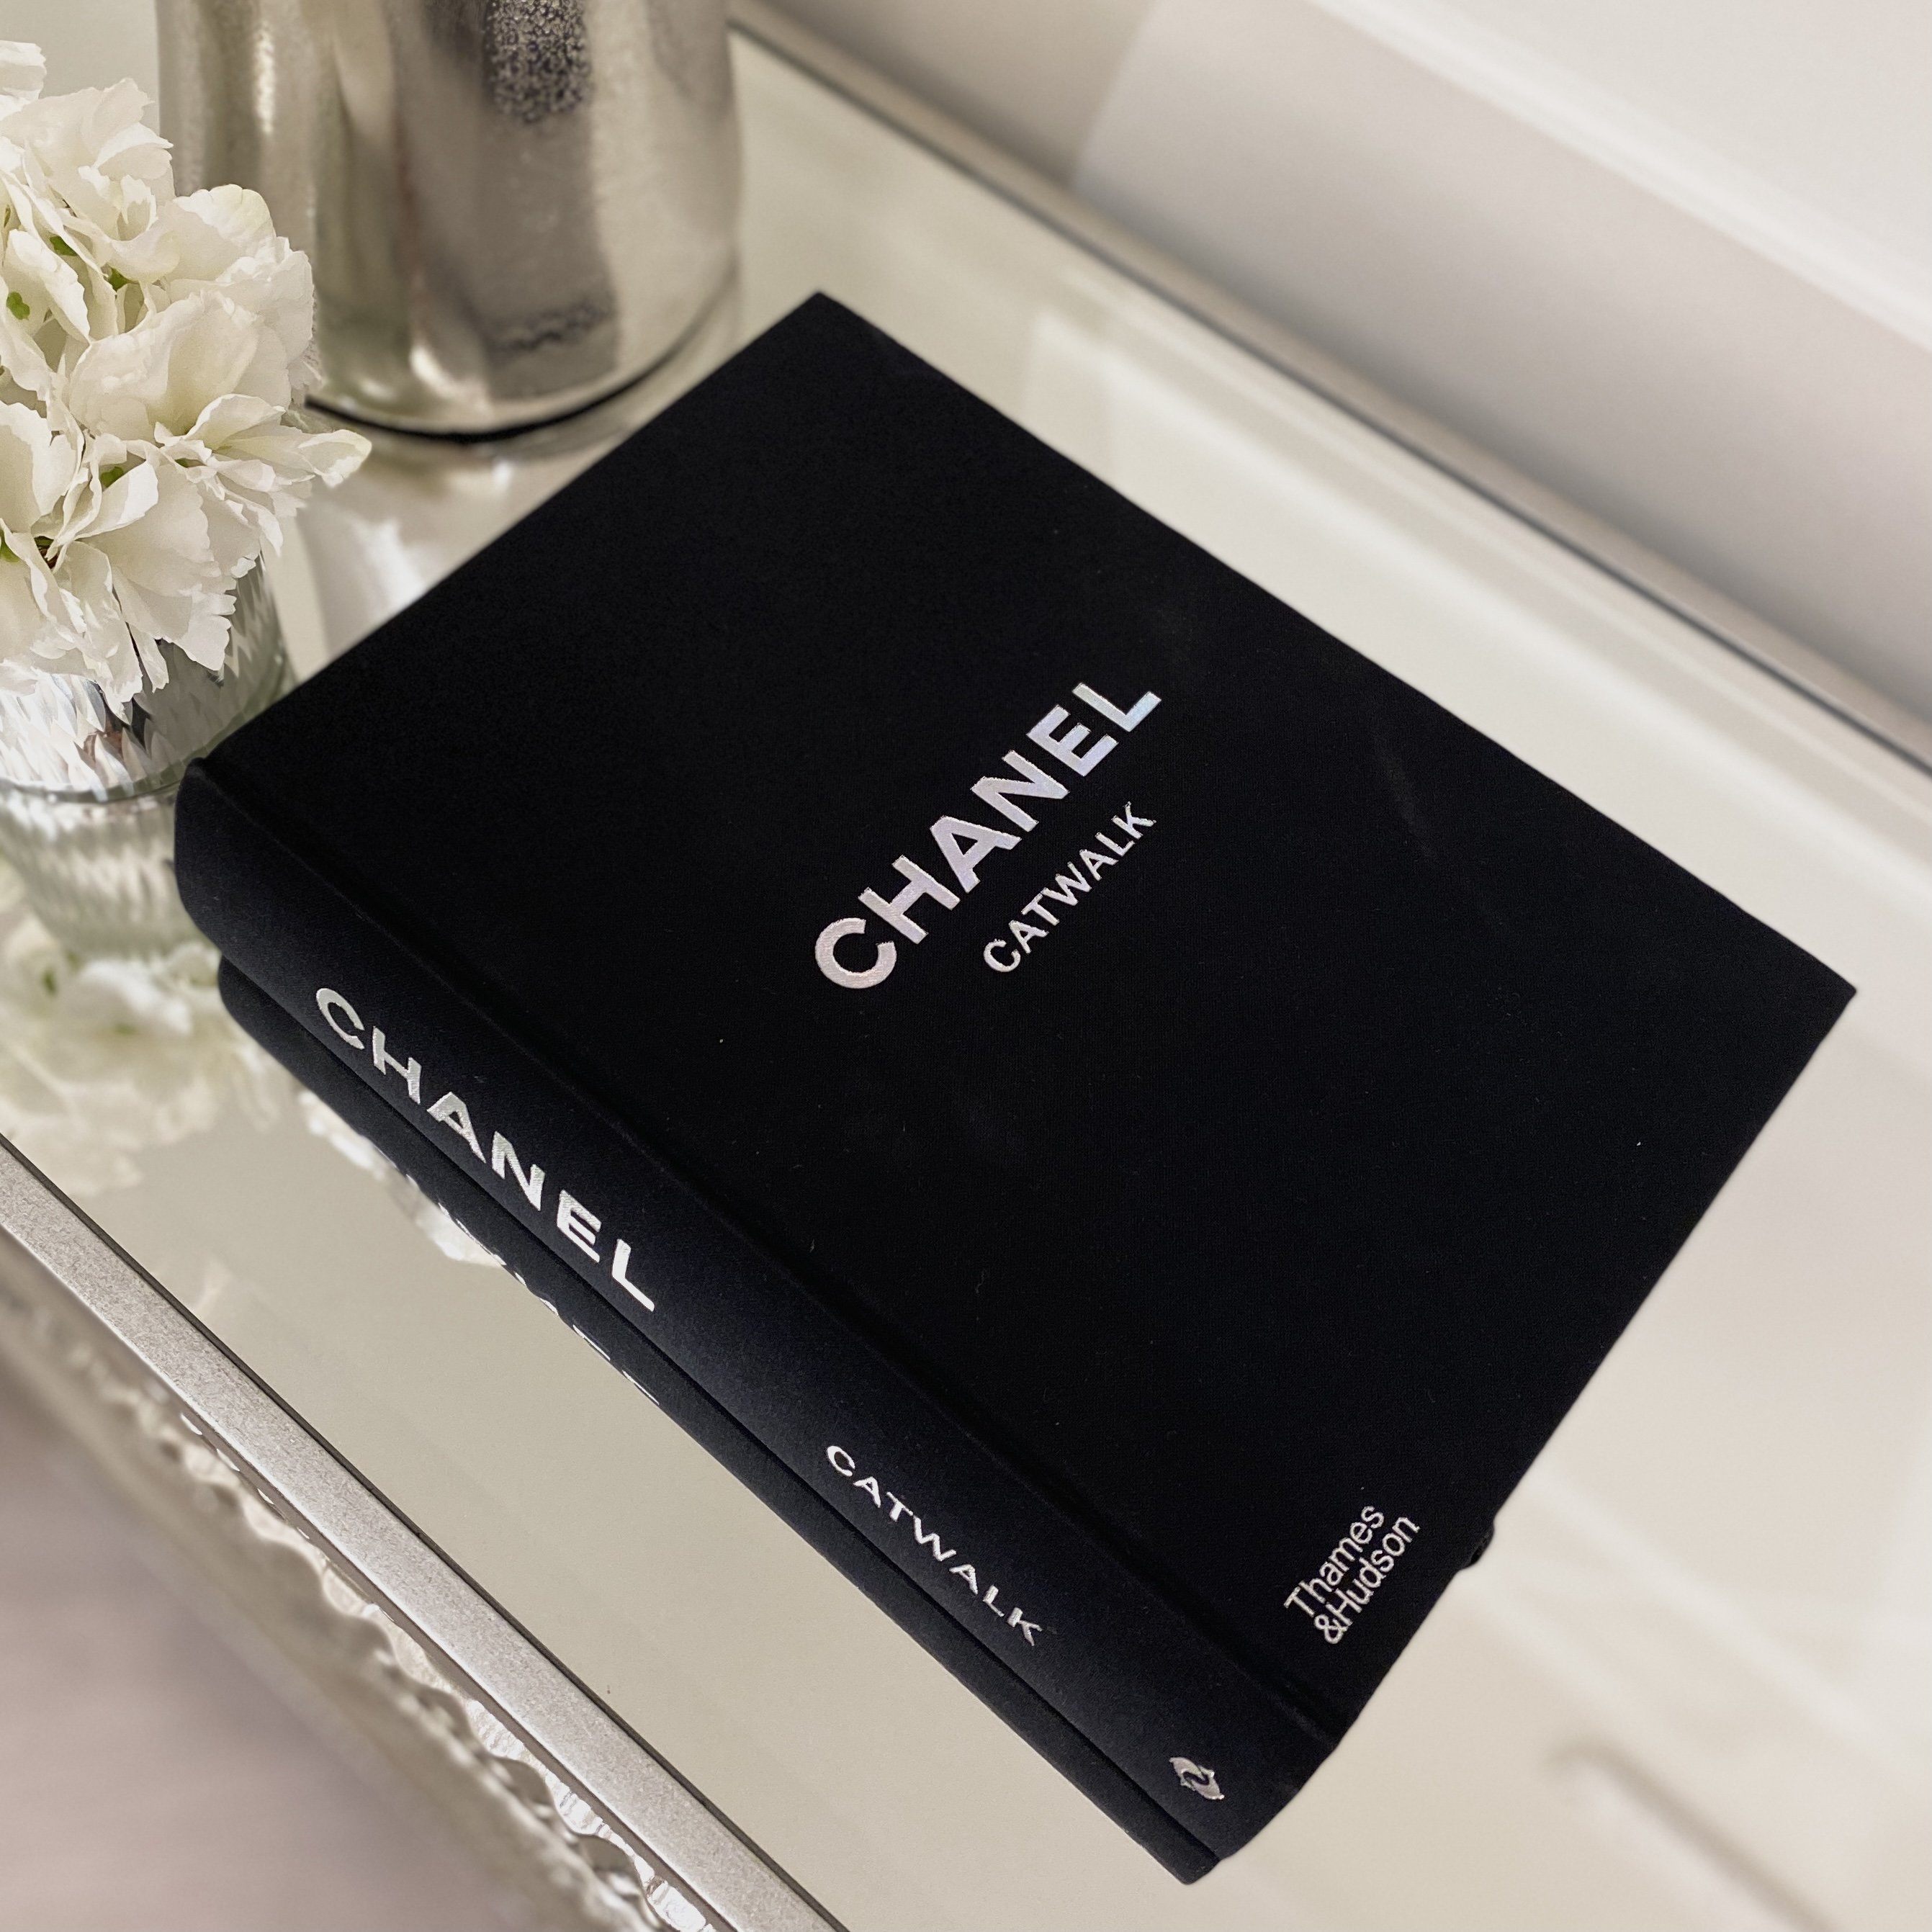 Chanel Catwalk Book, Coffee Table Books